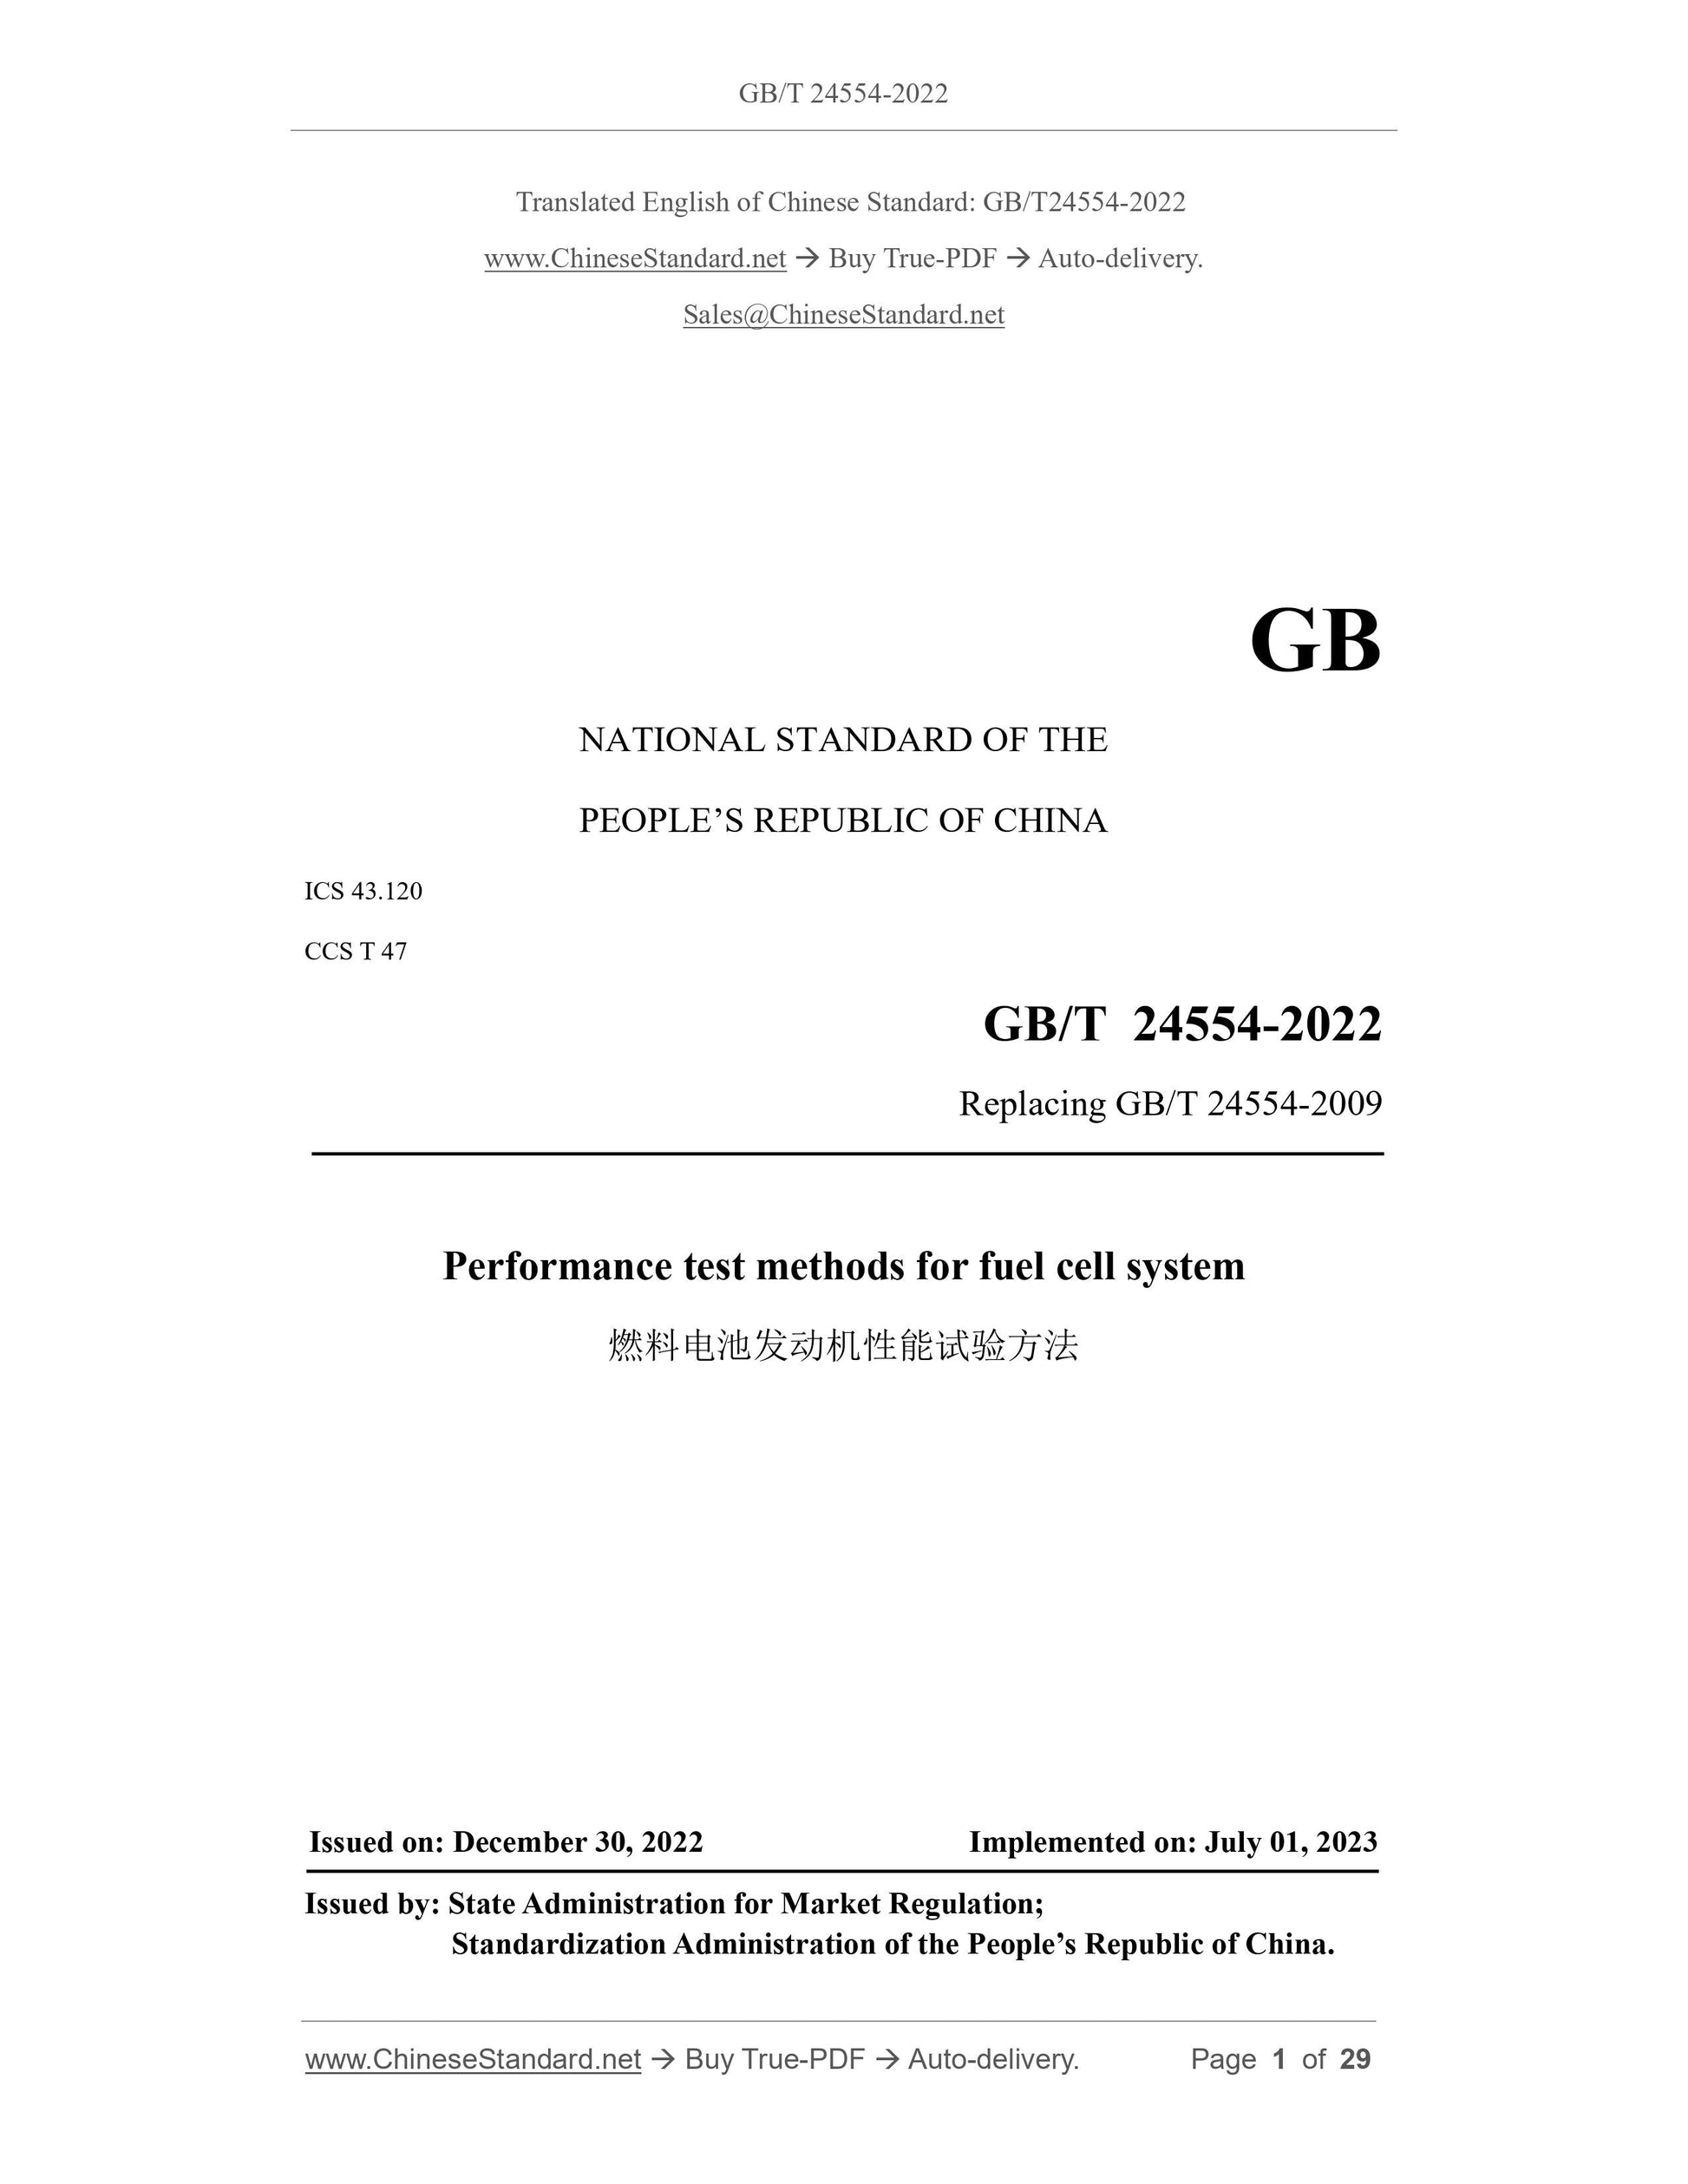 GB/T 24554-2022 Page 1